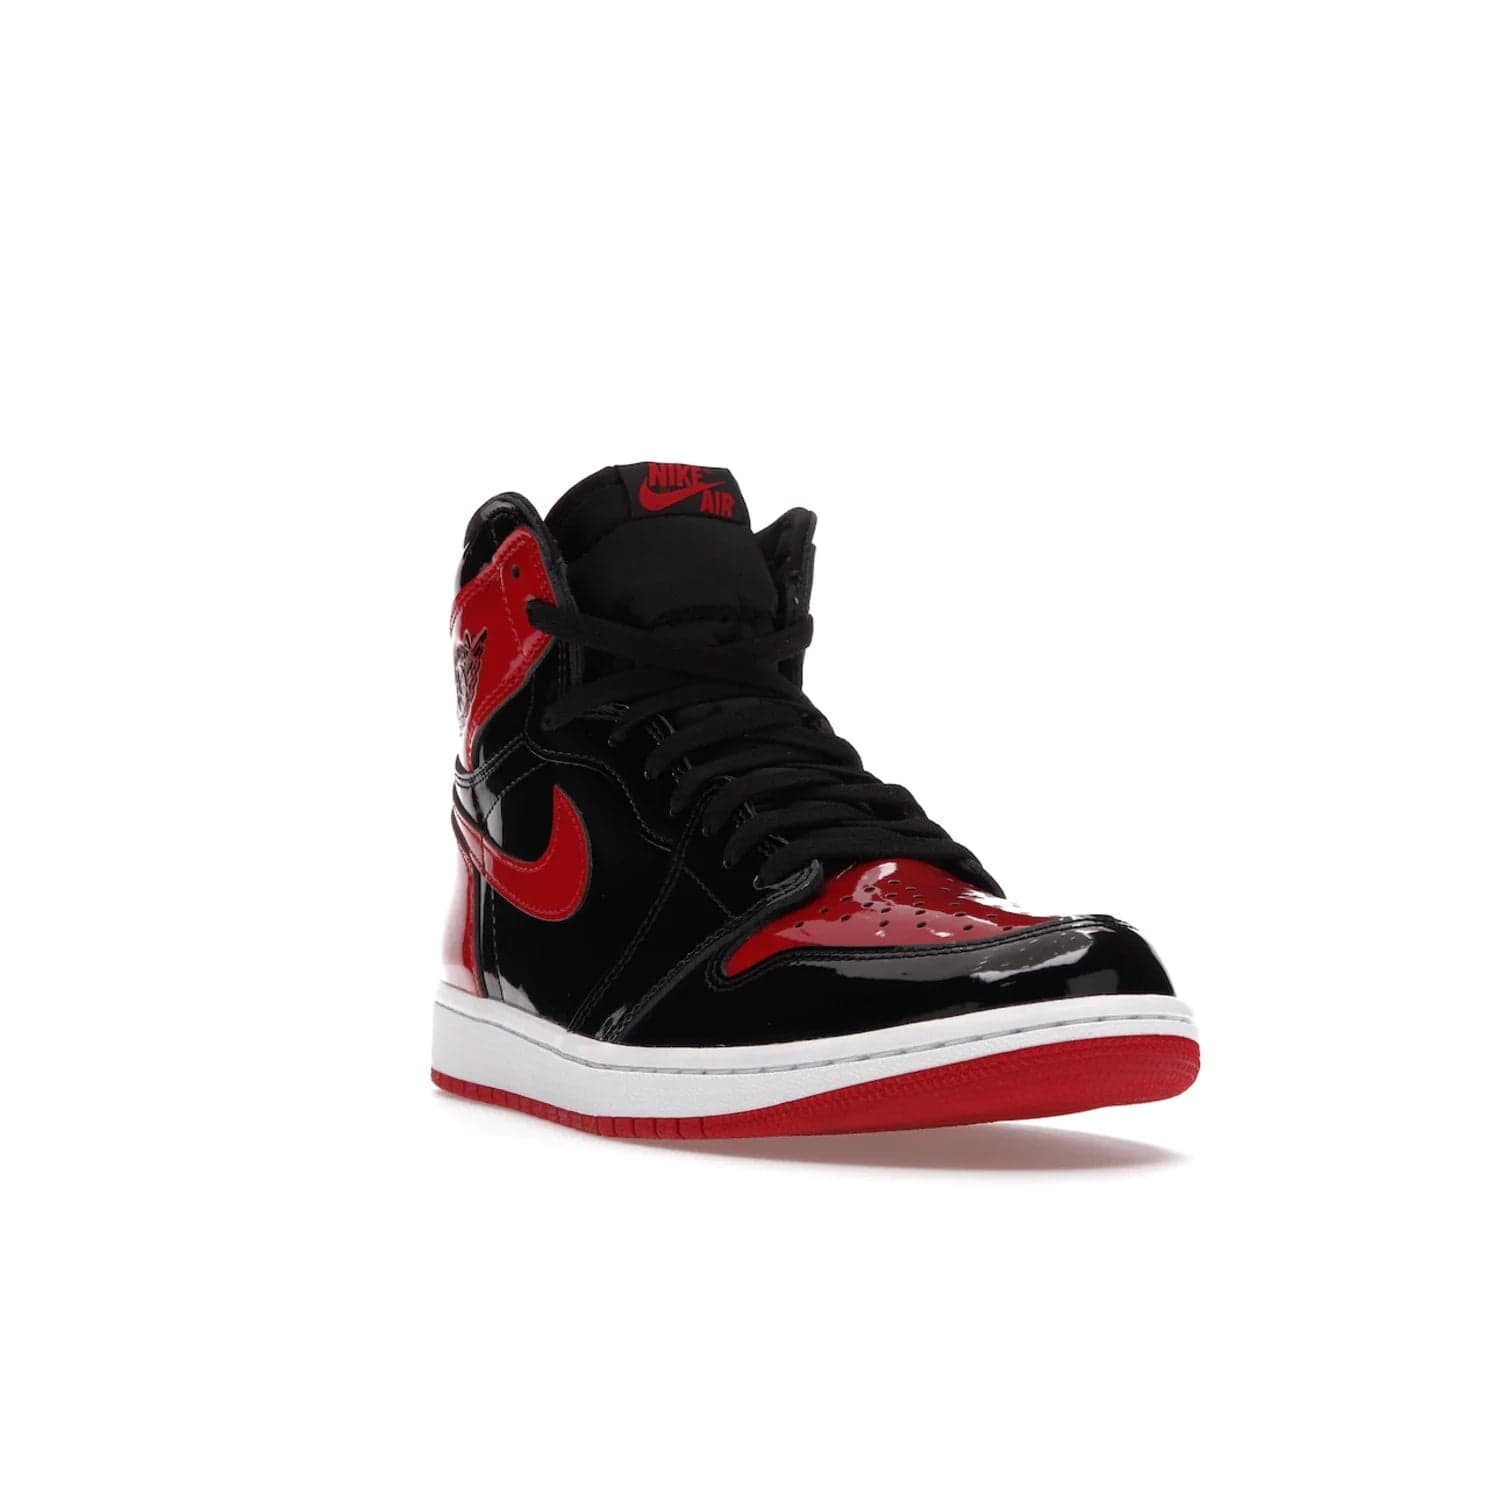 Jordan 1 Retro High OG Patent Bred - Image 7 - Only at www.BallersClubKickz.com - Introducing Air Jordan 1 Retro High OG Patent Bred - sleek patent leather upper, signature weaved Nike Air tongue and classic Wings logo on collar. Red and white sole complete signature look. Releasing December 2021 - perfect retro edition for holidays.